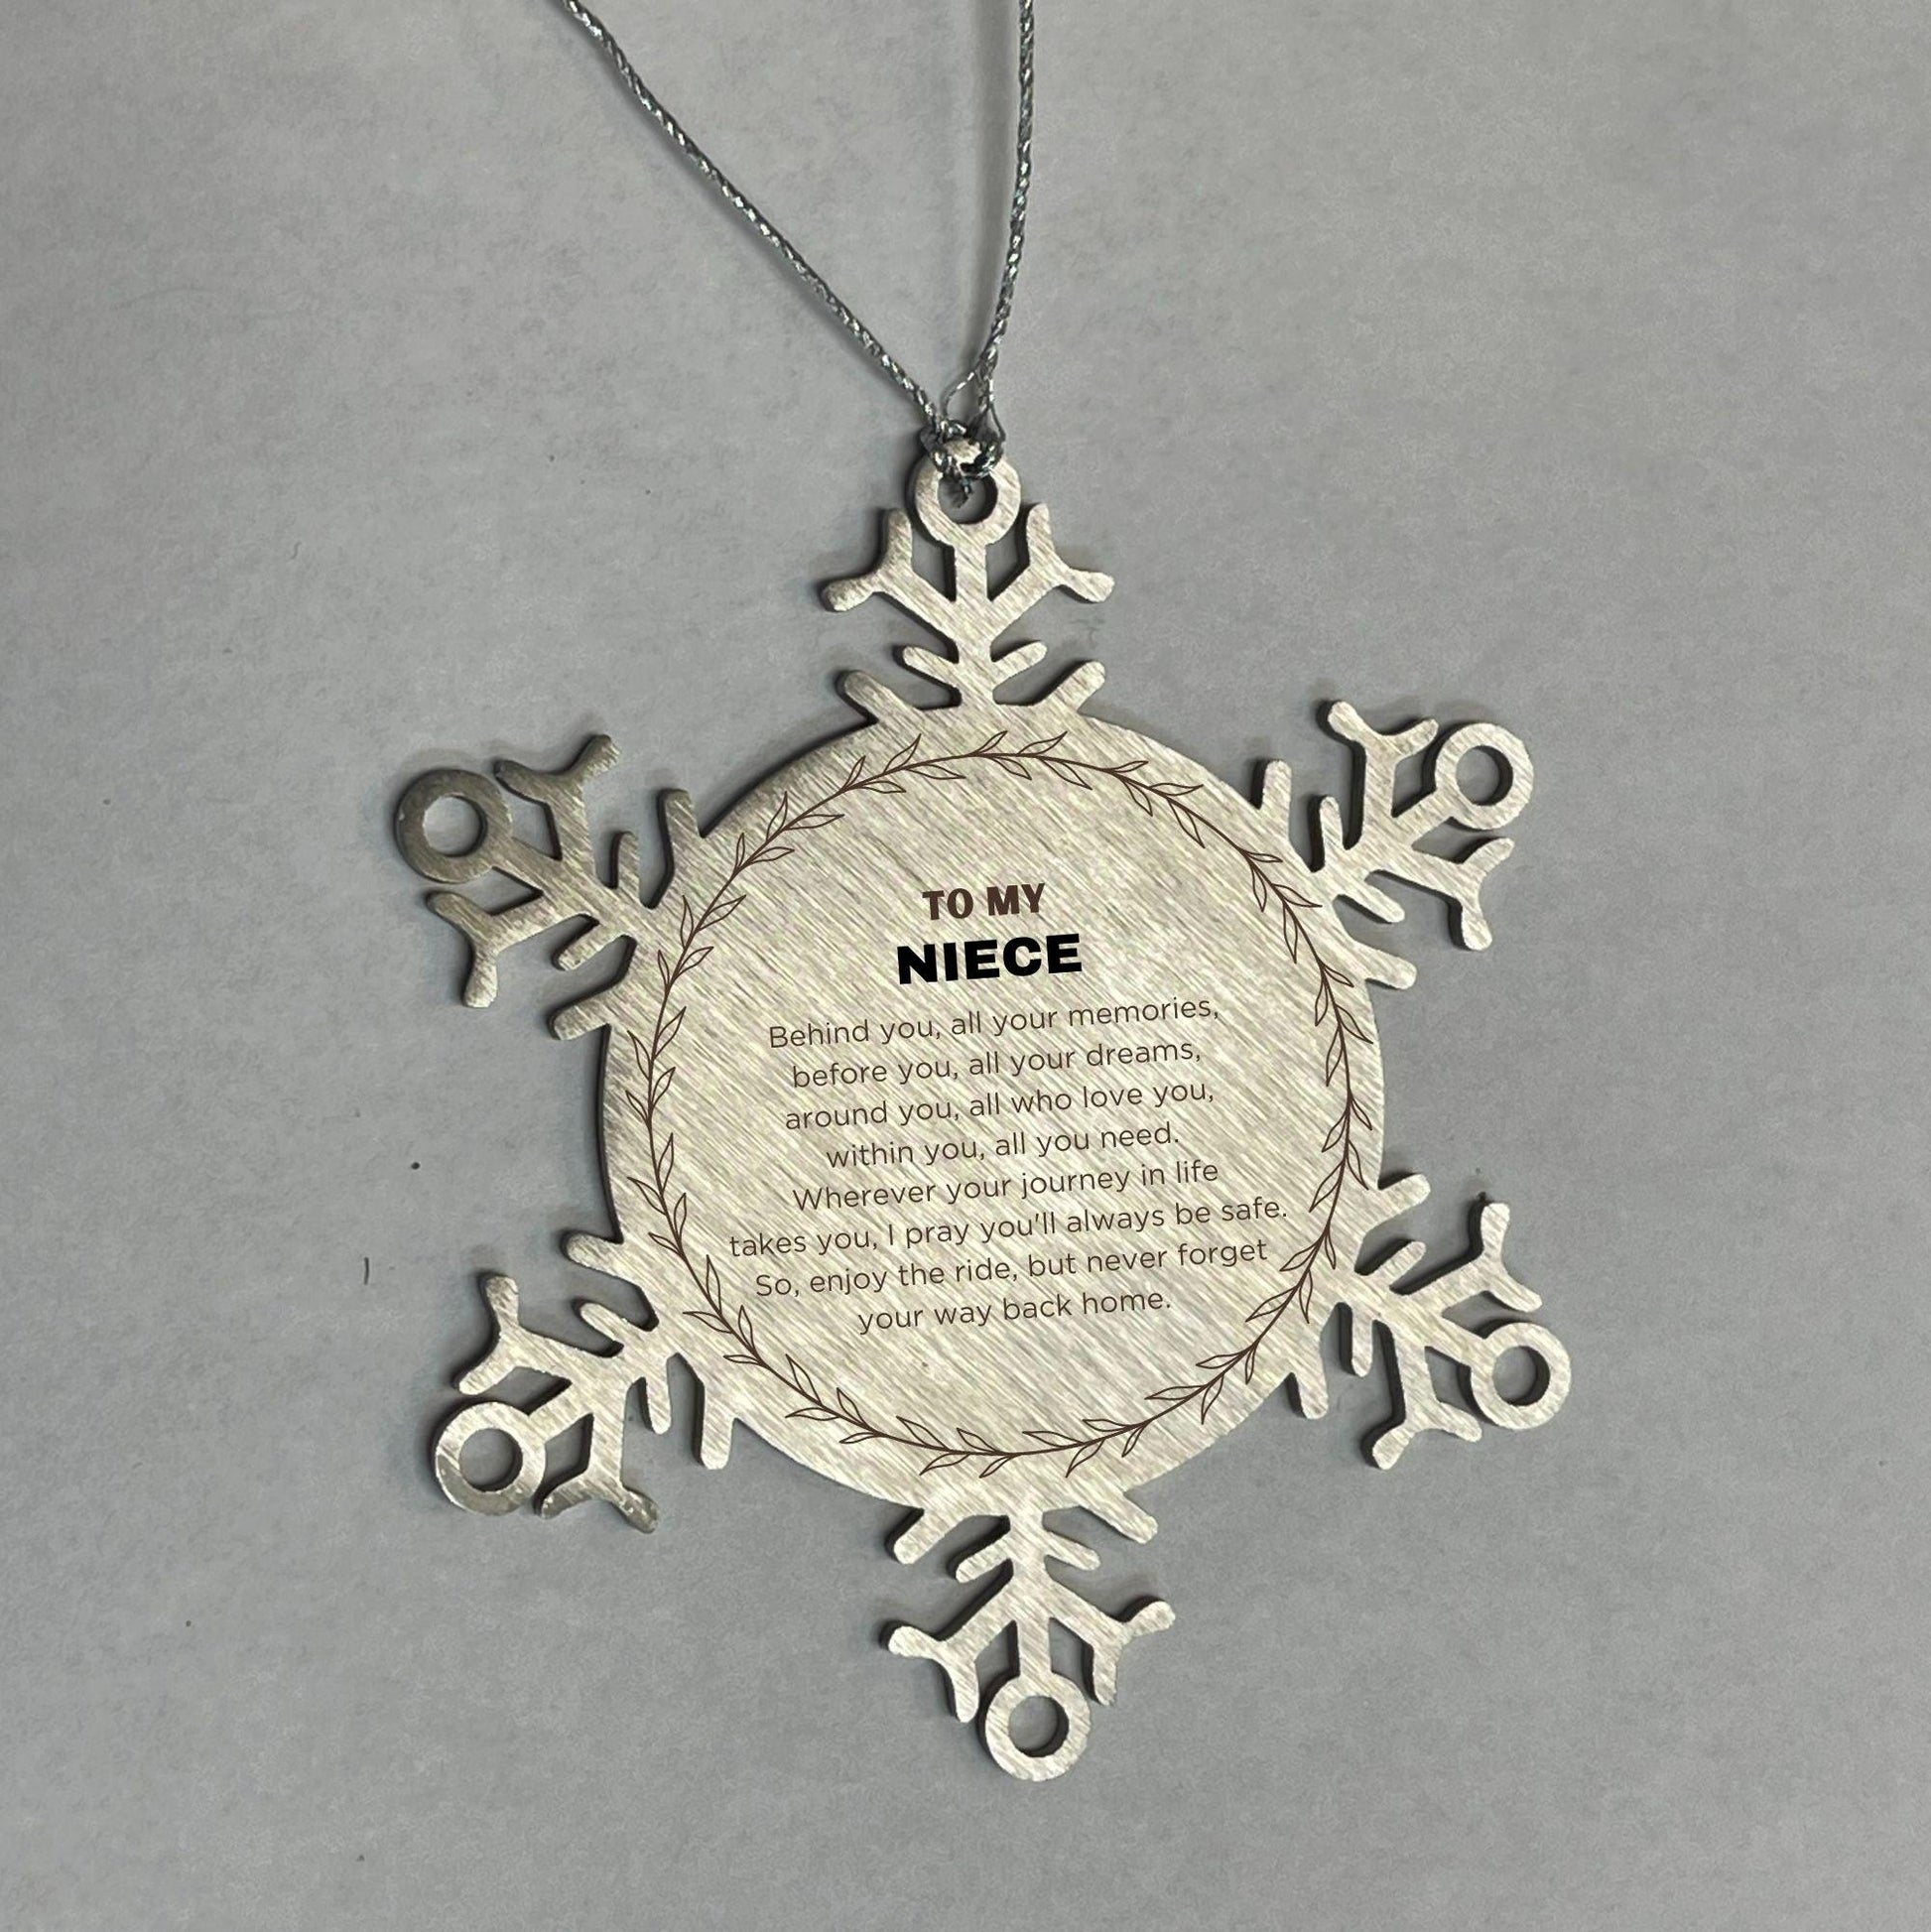 Inspirational Niece Snowflake Ornament - Behind you, all your Memories, Before you, all your Dreams - Birthday, Christmas Holiday Gifts - Mallard Moon Gift Shop